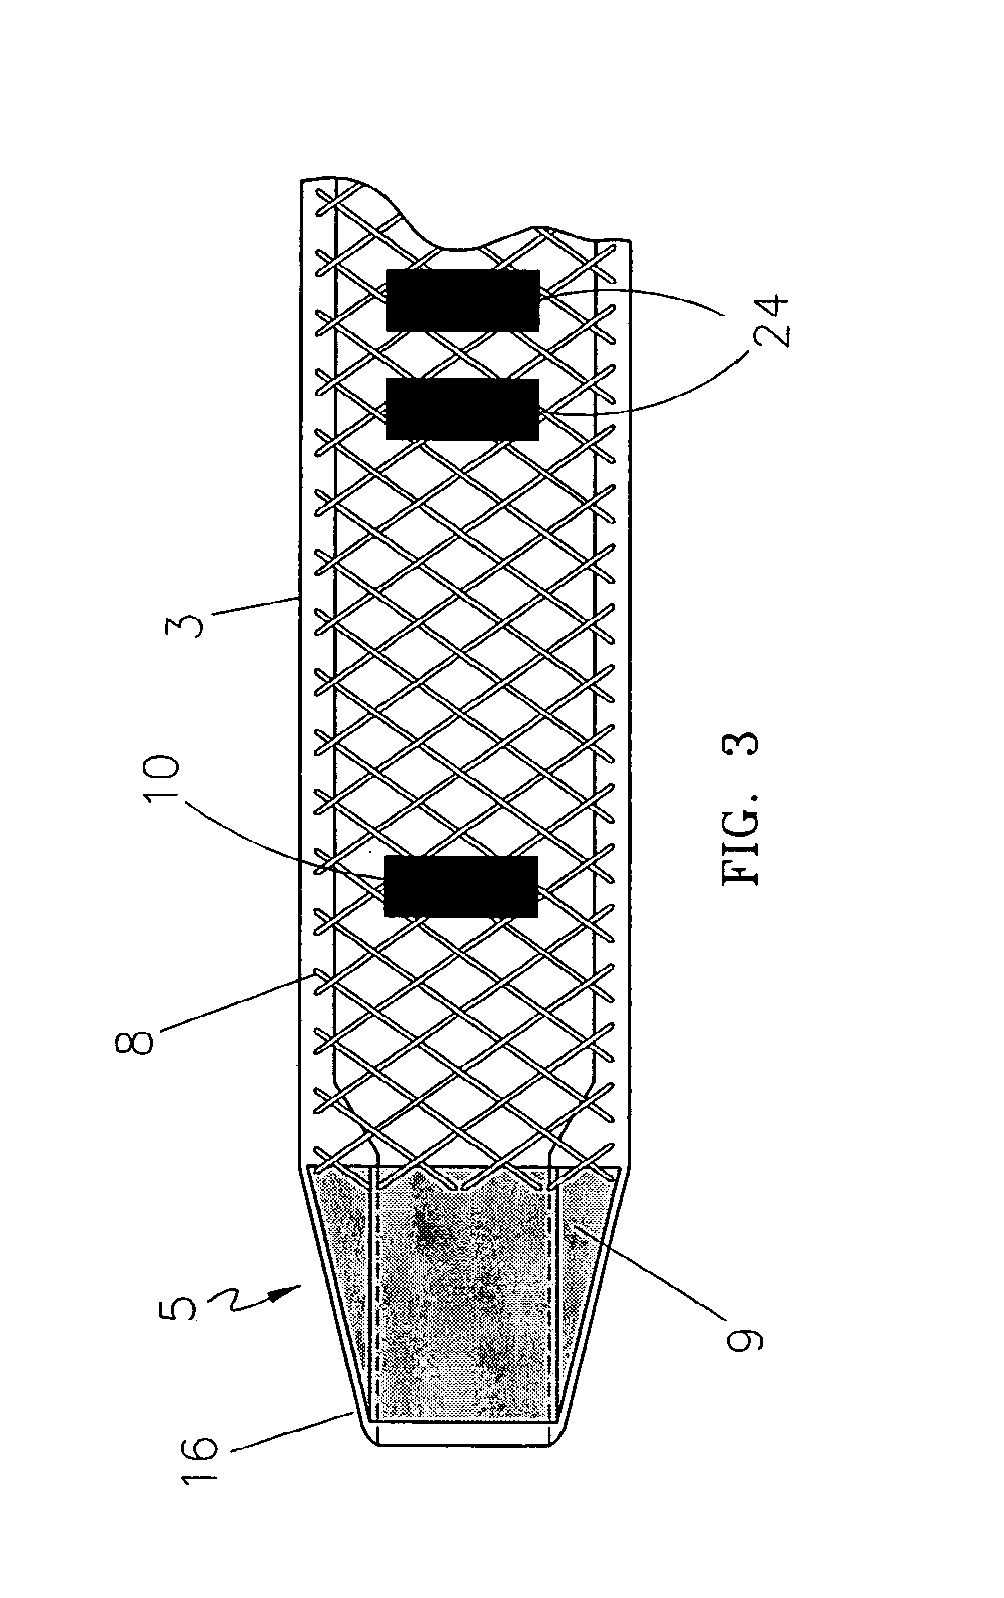 Endovascular Treatment Apparatus and Method